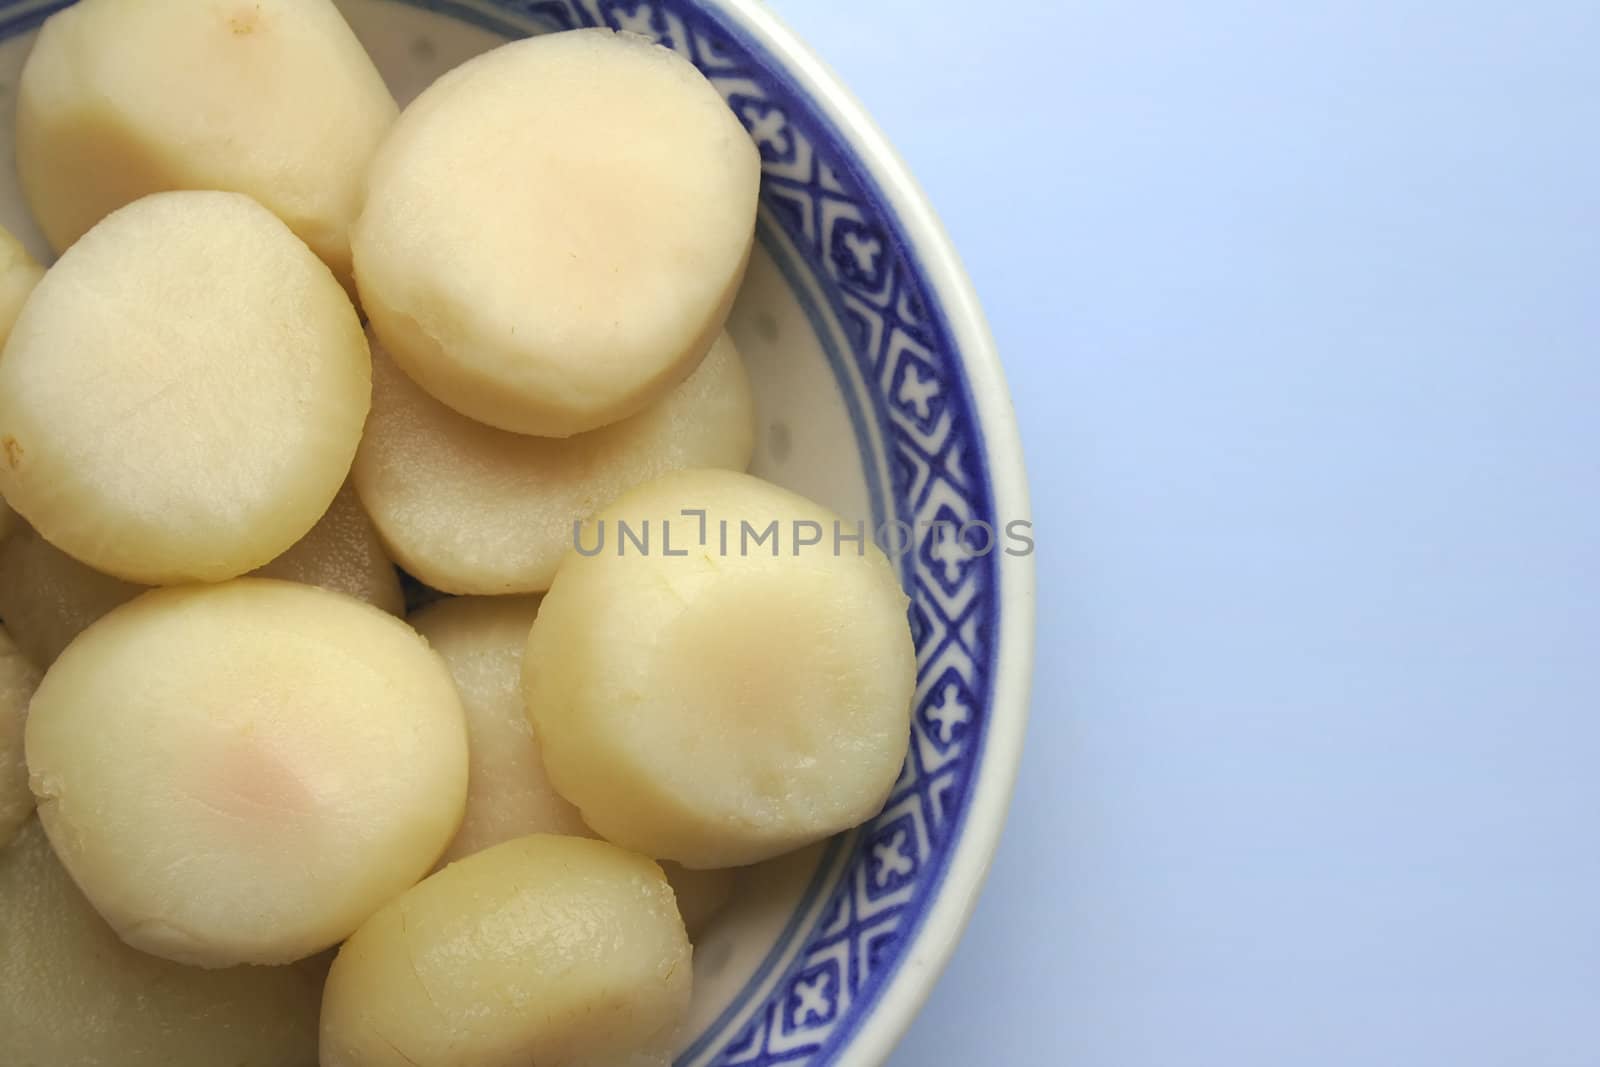 Peeled water chestnuts, tasty ingredients for a Chinese meal.